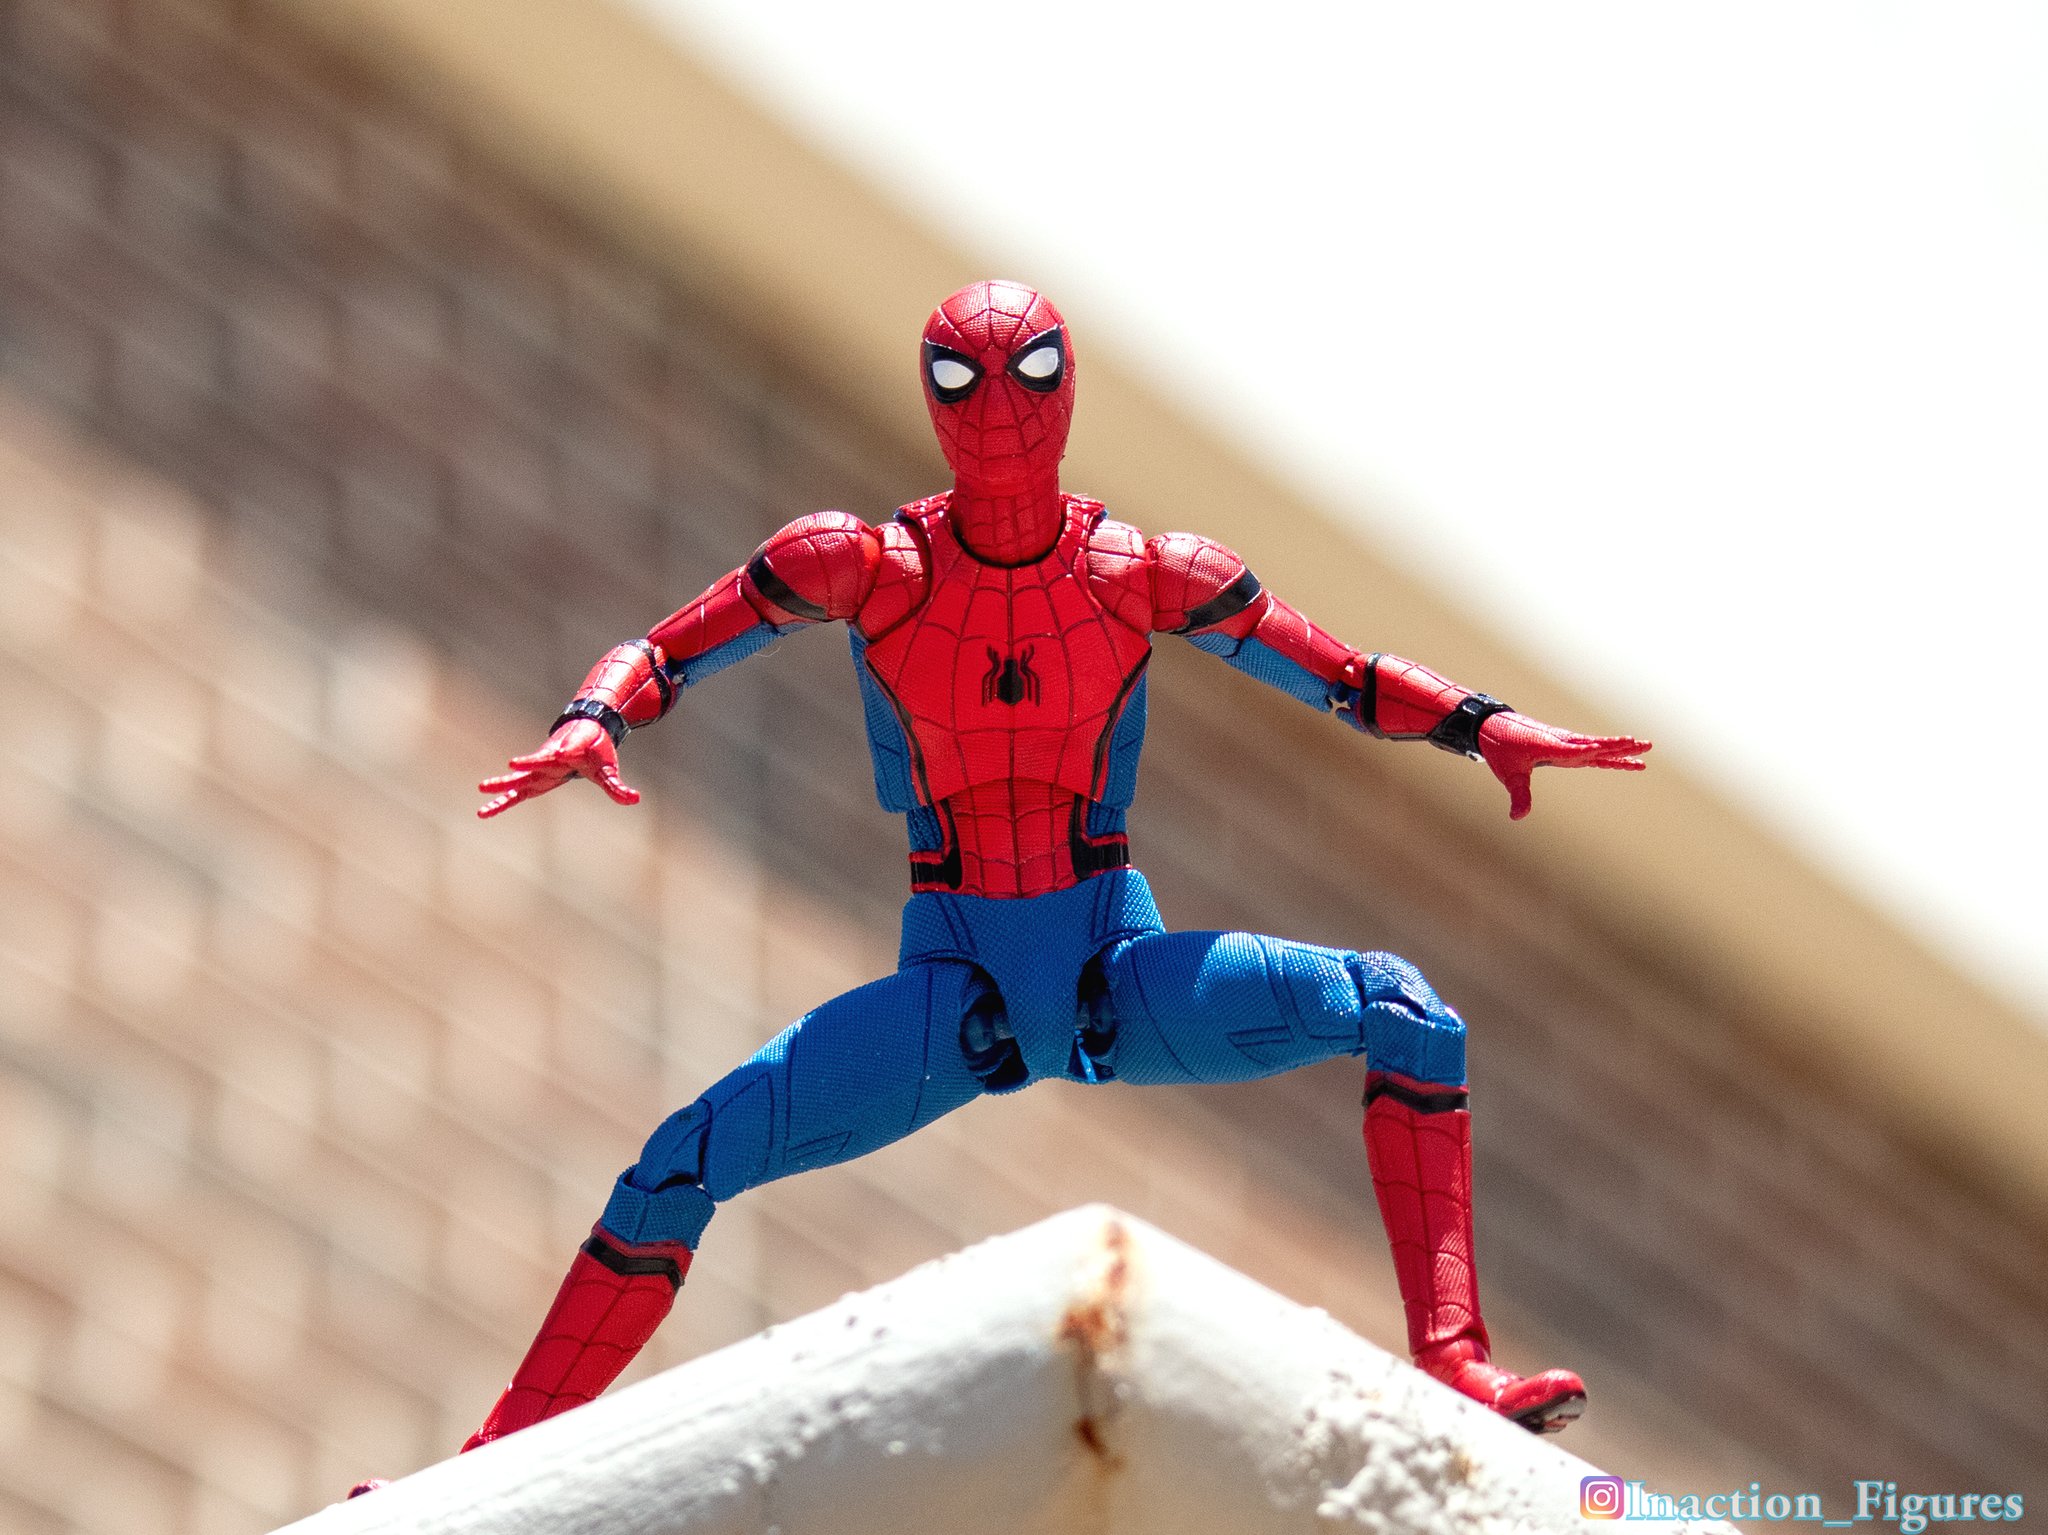 I Recreated Spider-Man Poses with an Action Figure! : r/marvelstudios